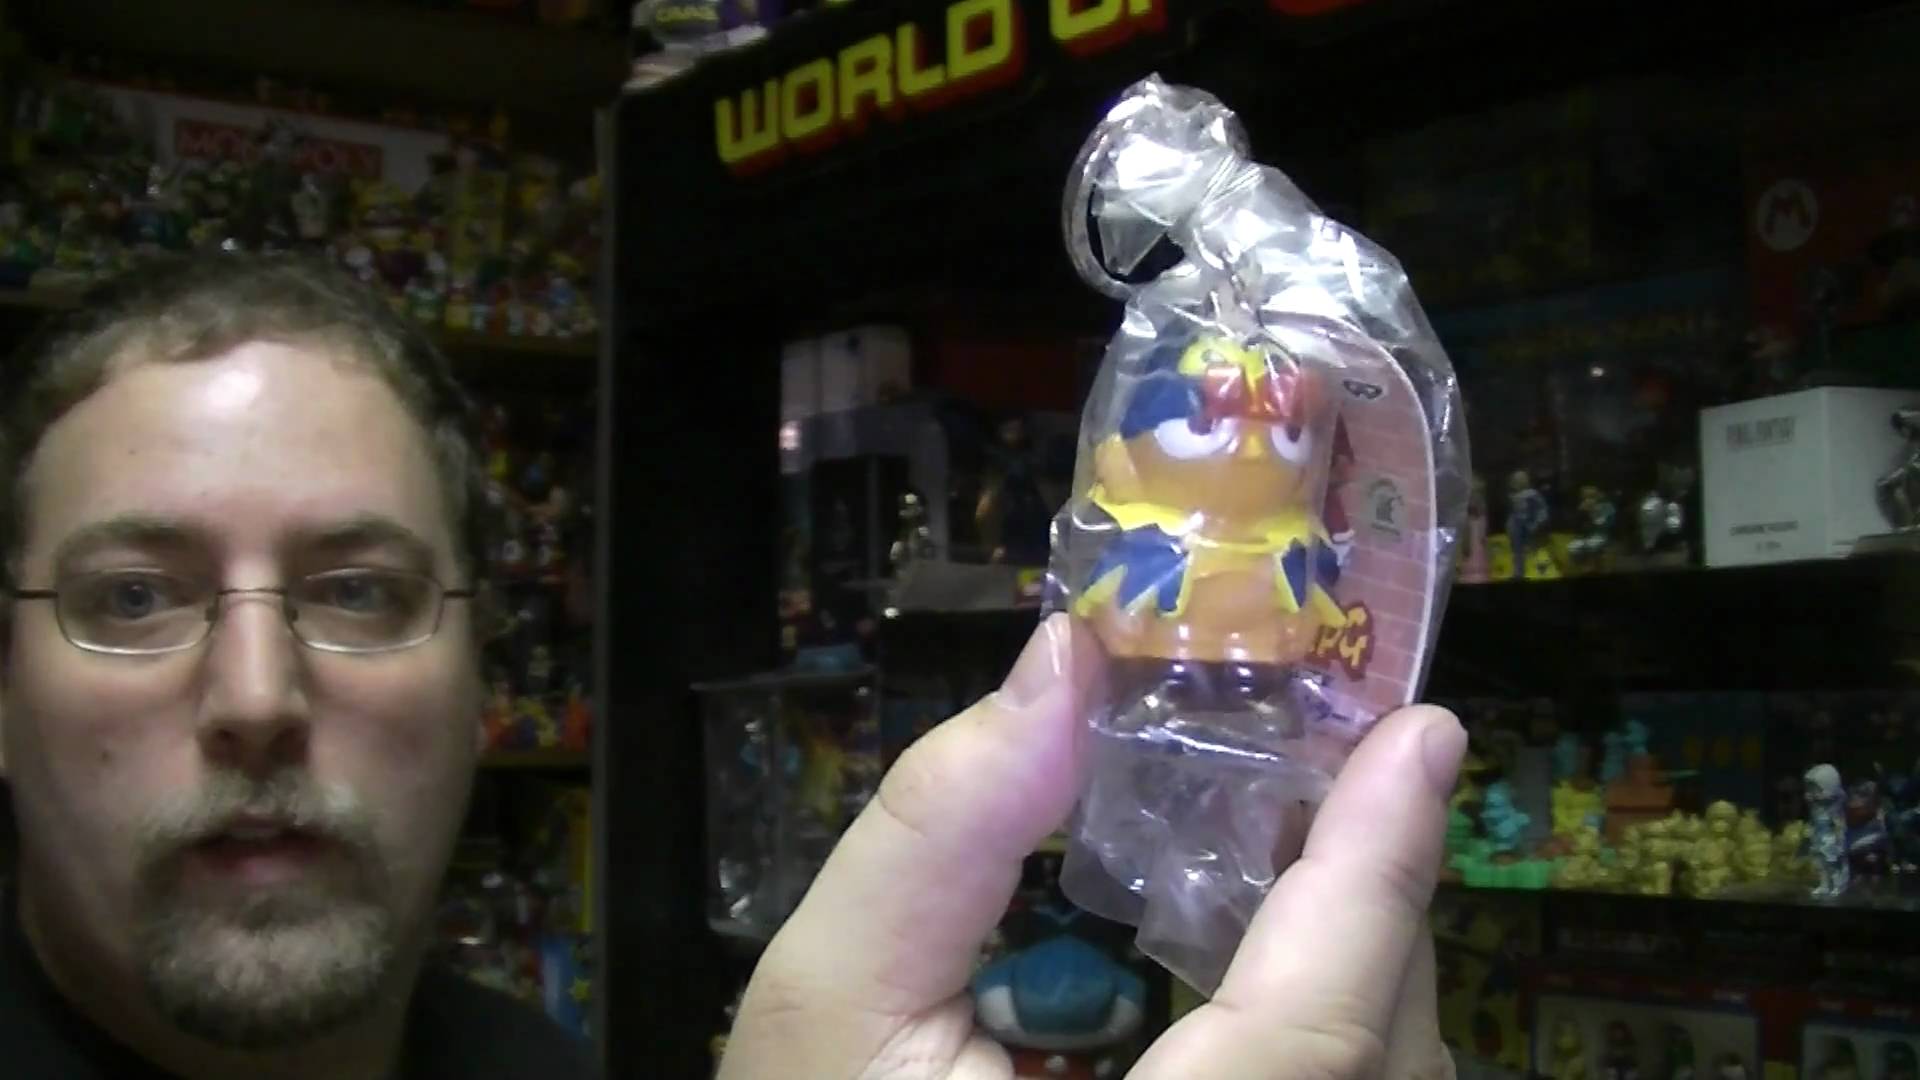 Super Mario RPG Merchandise Part 1 - Figures and other toys - YouTube